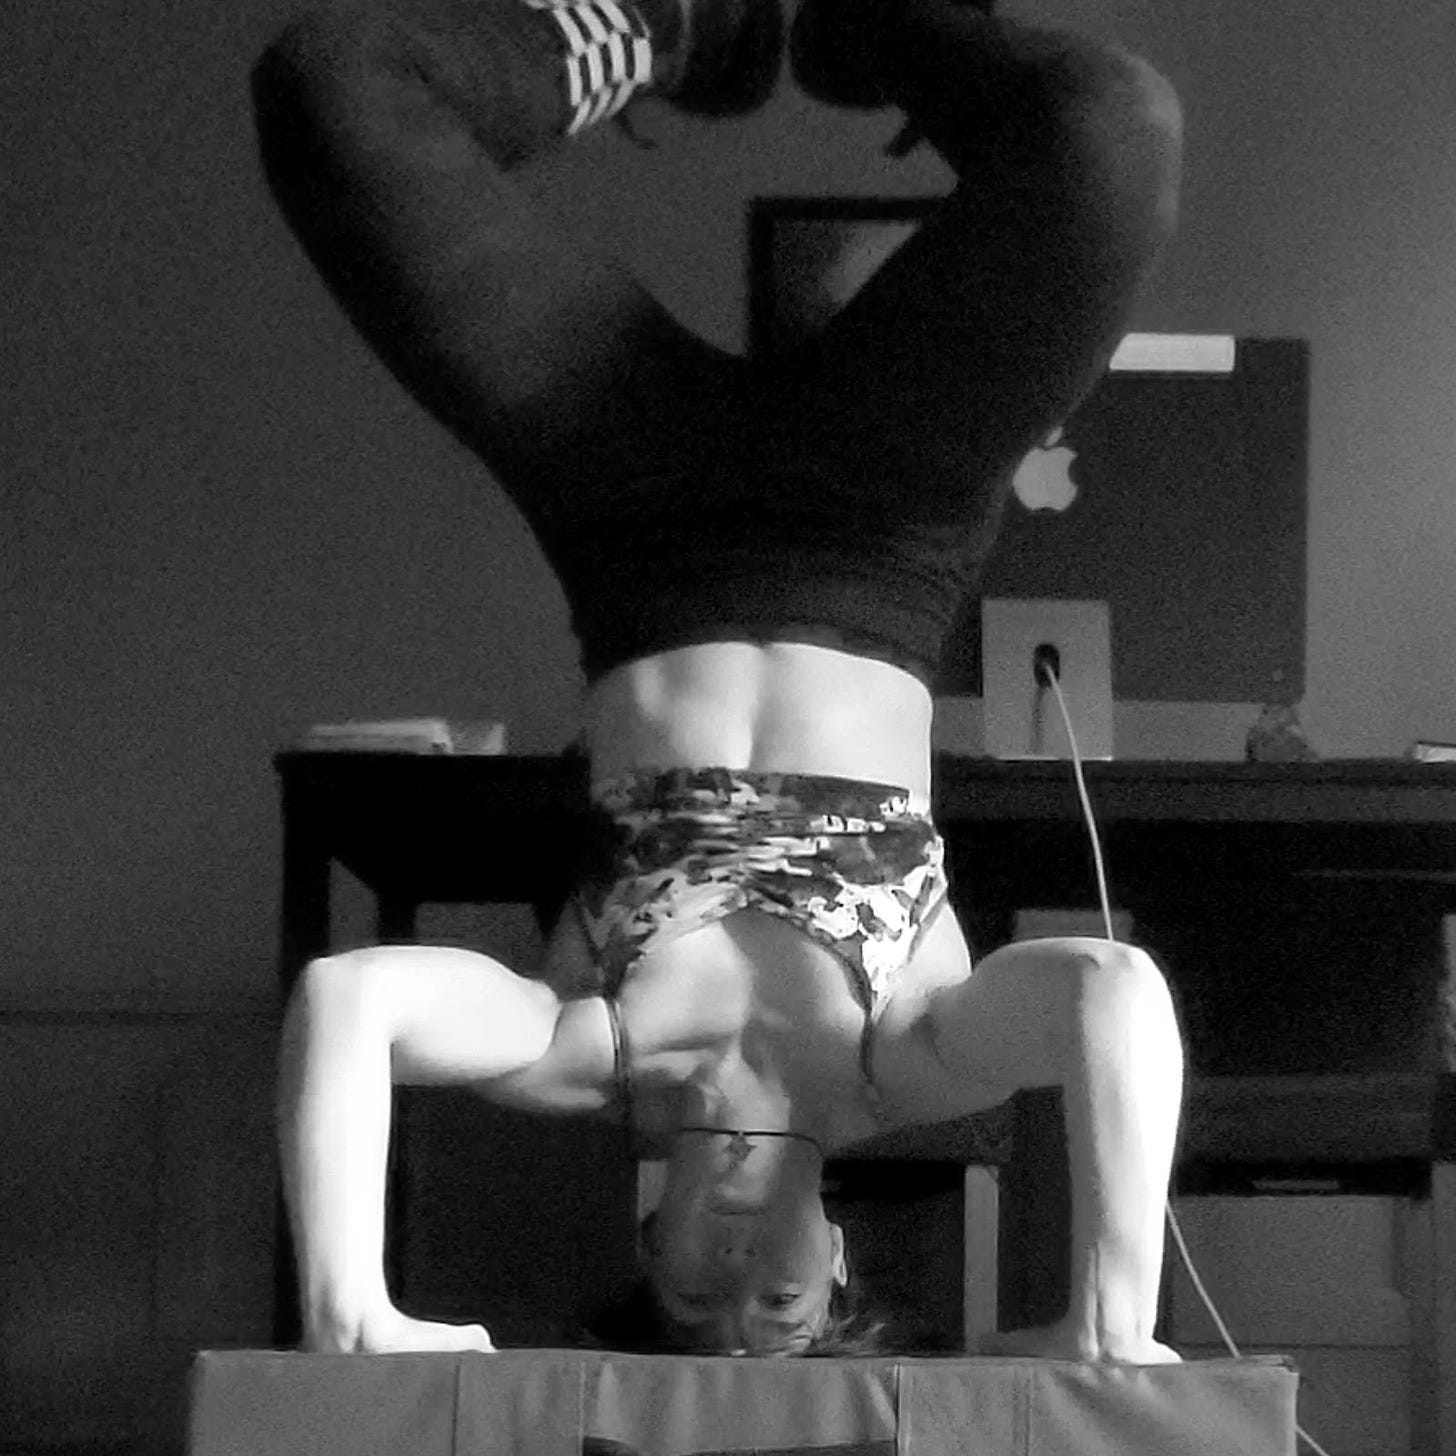 The author doing a headstand